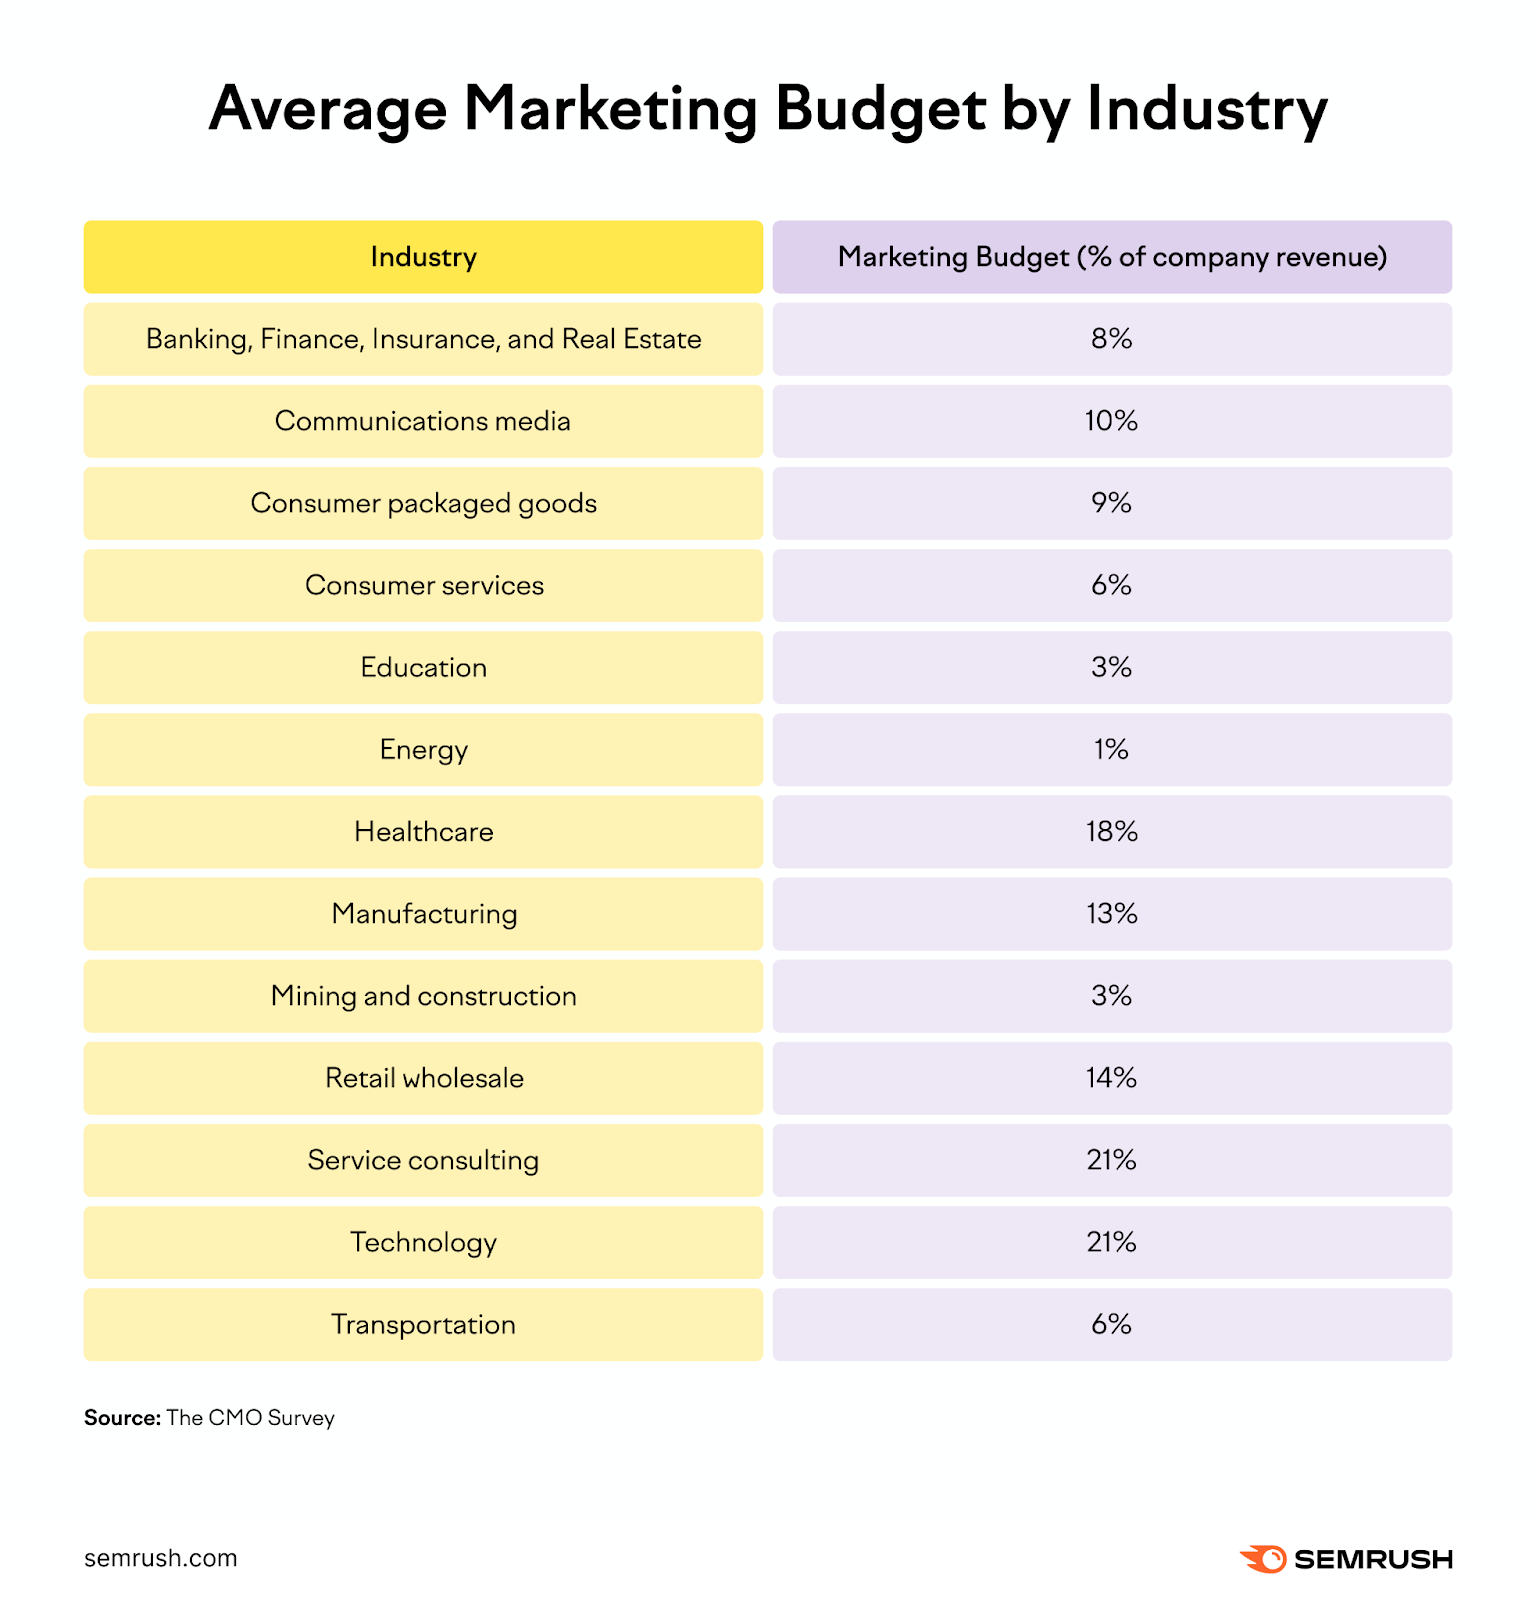 Average marketing budget, as percentage of company revenue, by industry: banking, finance, insurance, and real estate is 8%; communications media is 10%, consumer packaged goods 9%, consumer services 6%, education 3%, energy 1%, healthcare 18%, manufacturing 13%, mining and construction 3%, retail wholesale, 14%, service consulting 21%, technology 21%, transportation 6%.